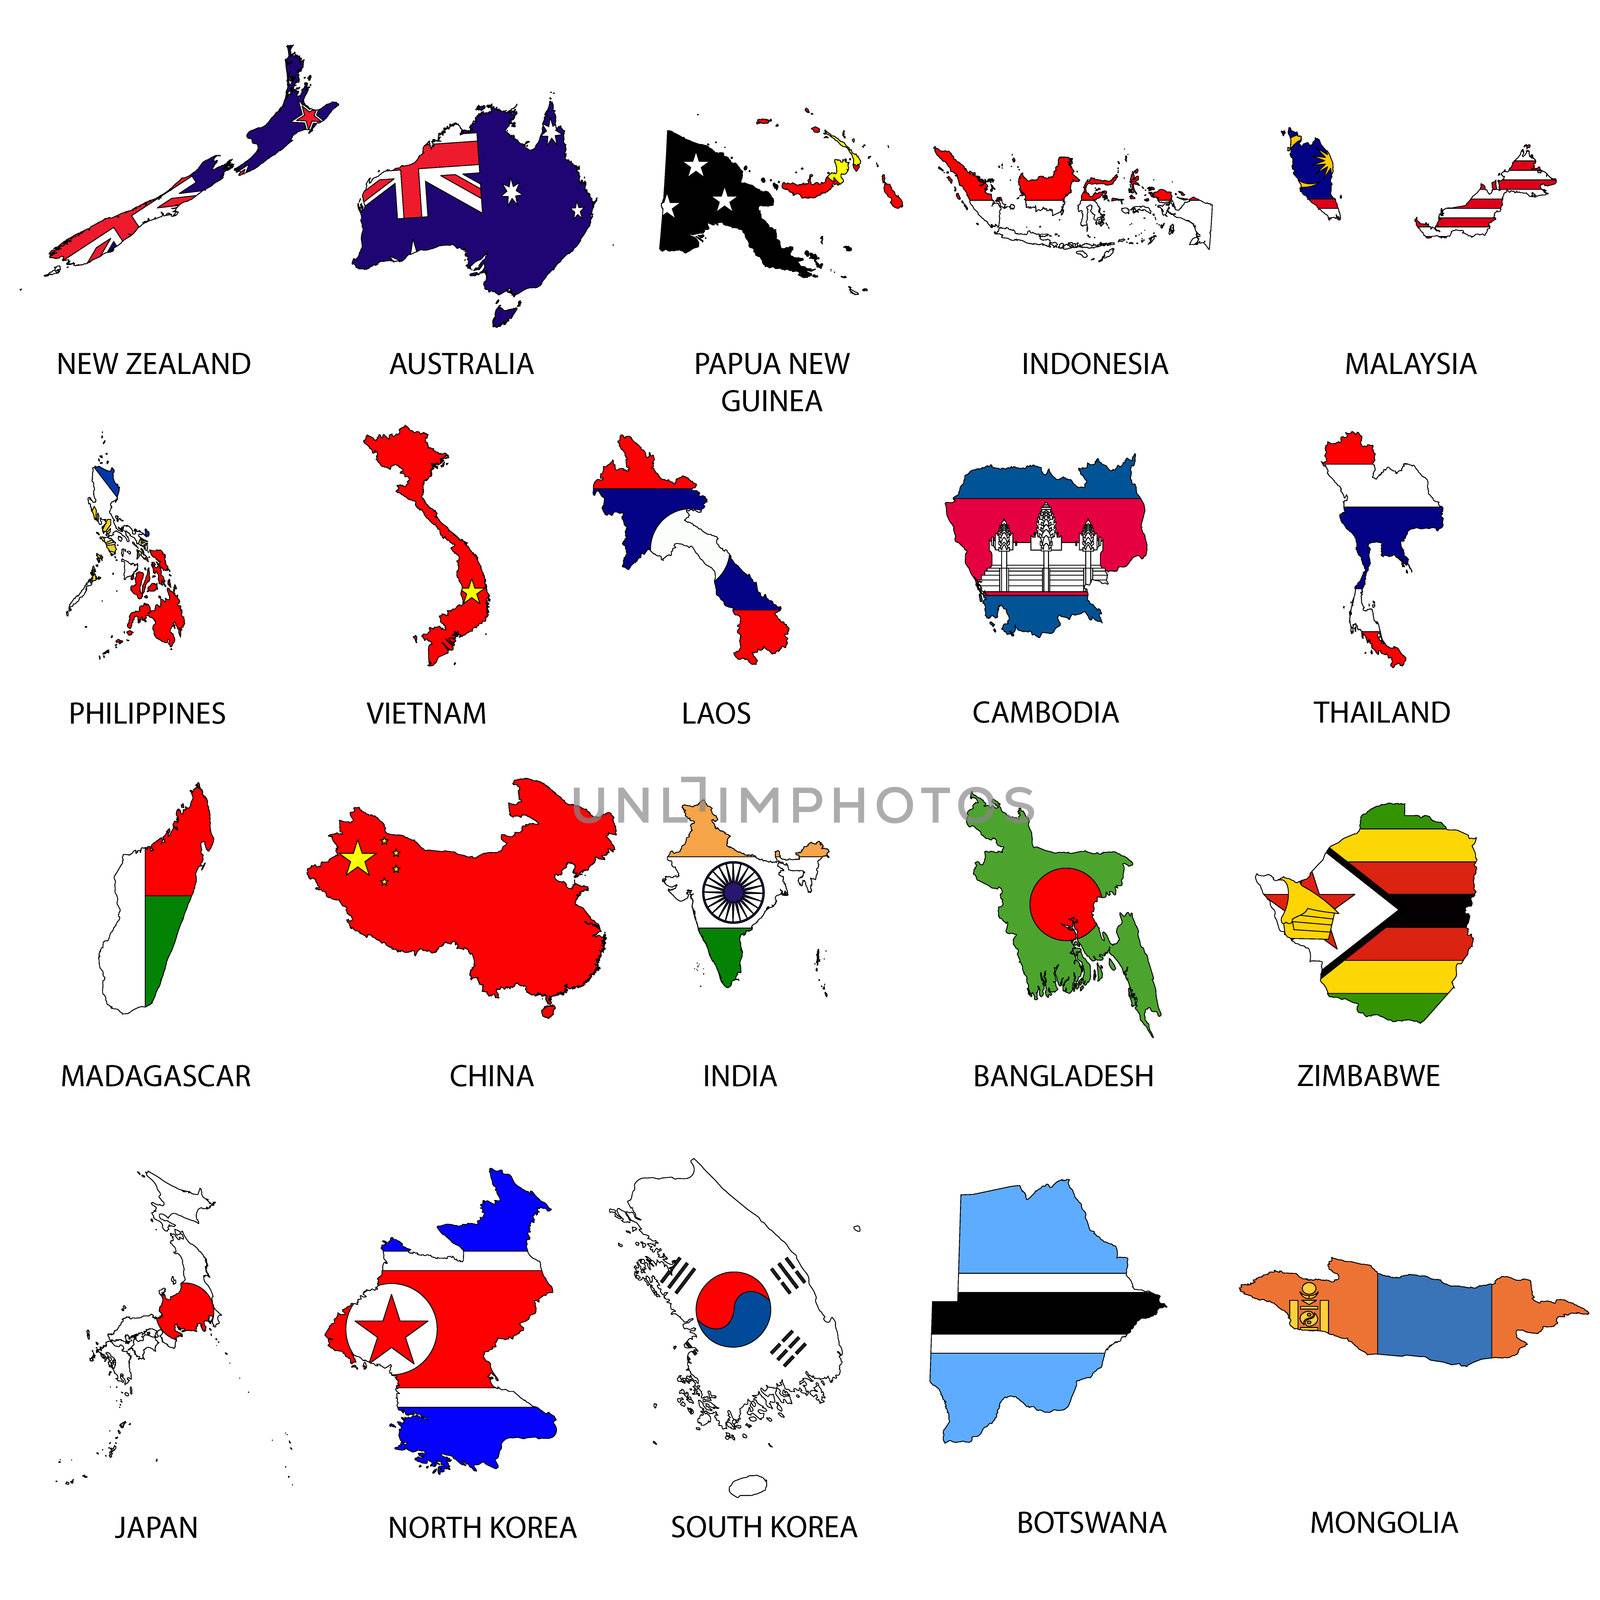 Illustrated Outlines of Countries with Flag inside by DragonEyeMedia